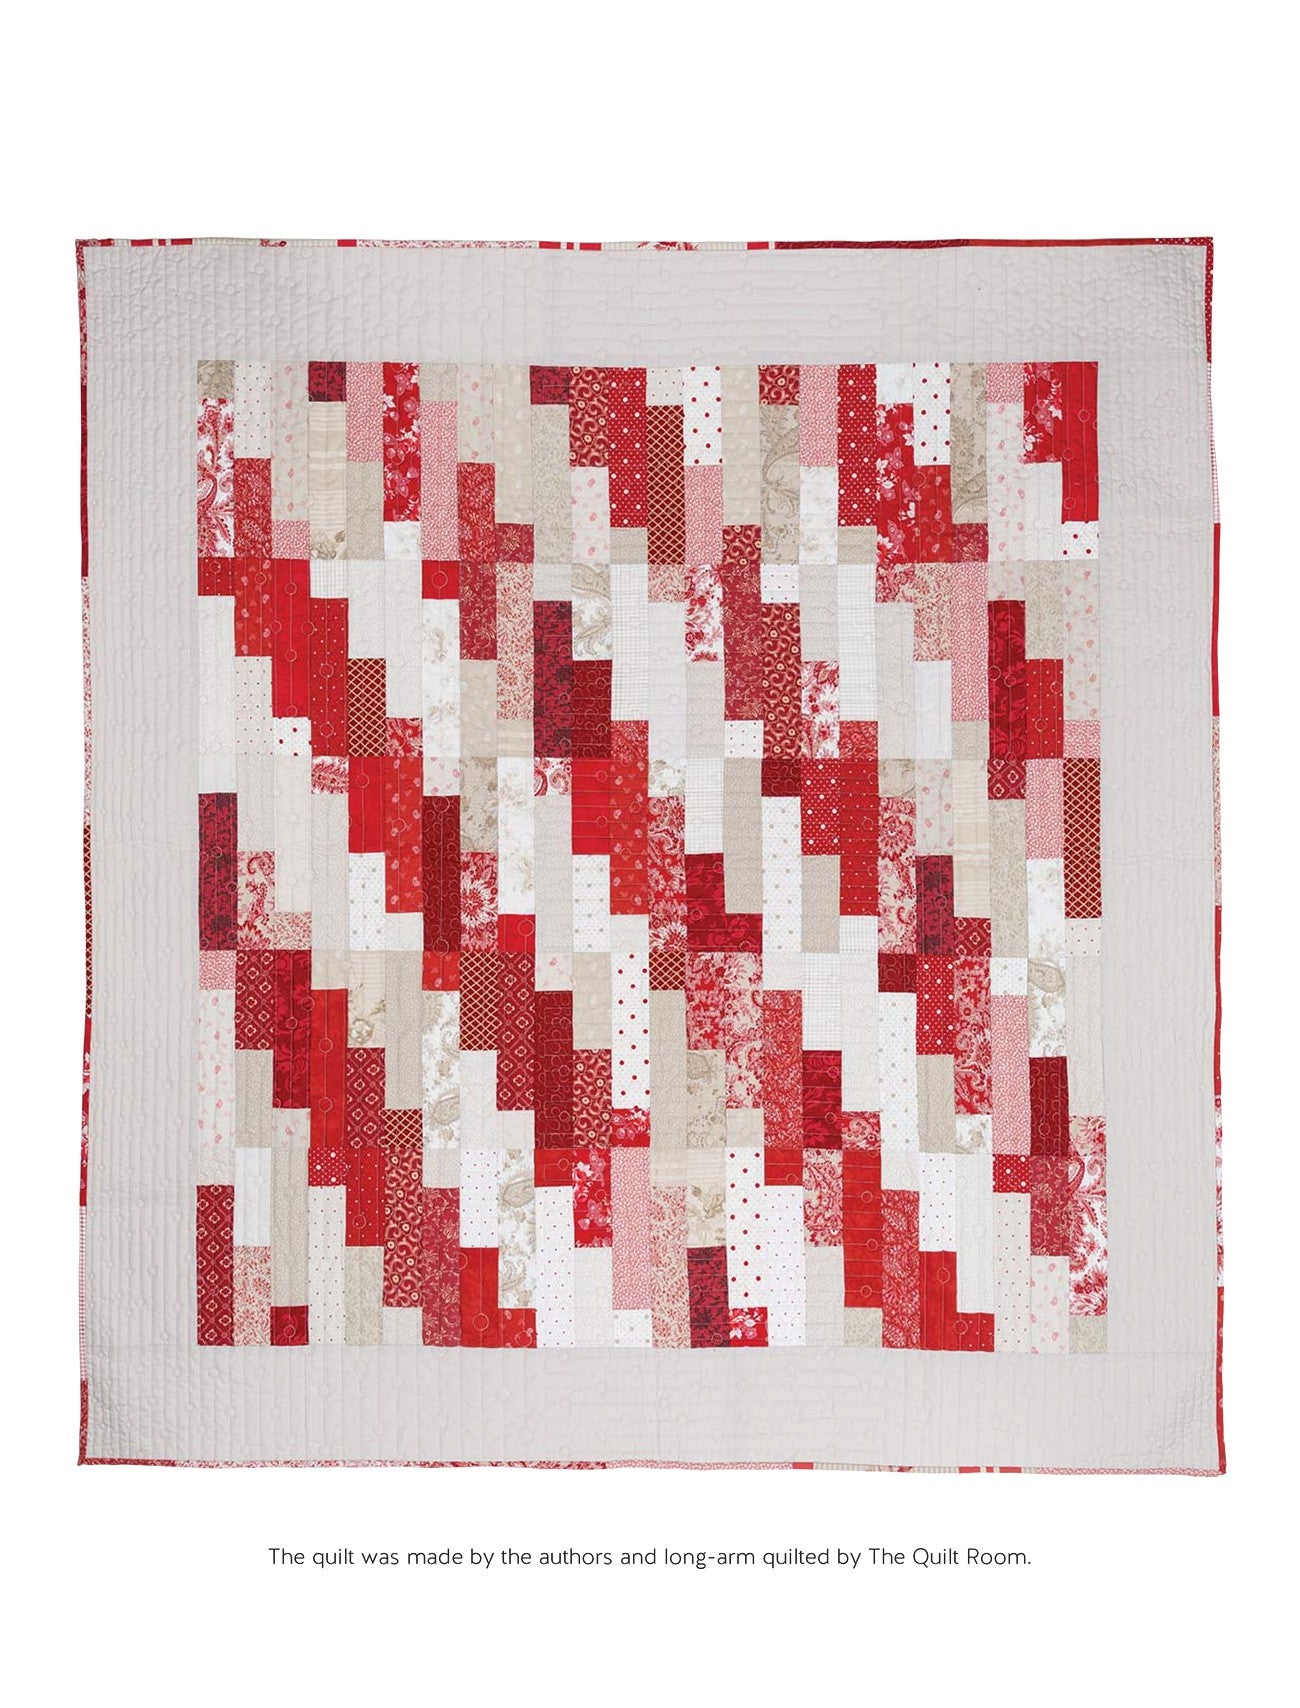 Jelly Roll Quilts in a Weekend by Pan & Nicky Lintott